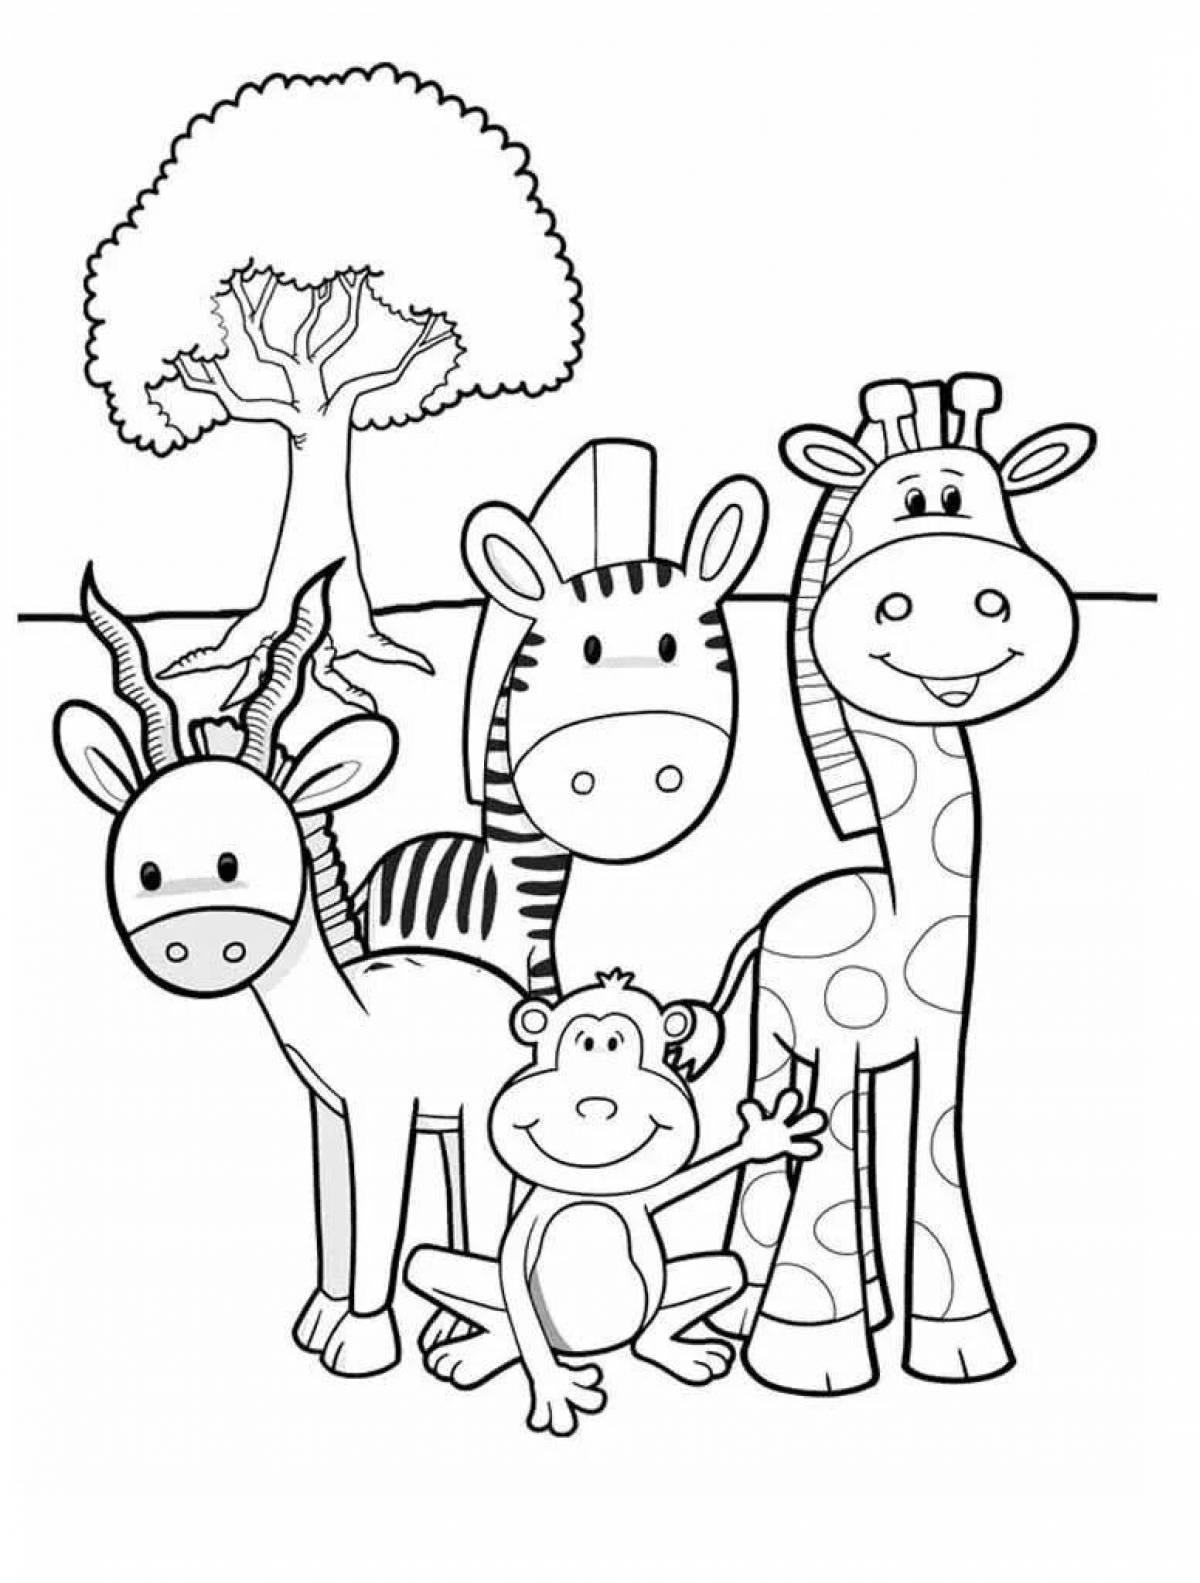 Intriguing African animal coloring book for 3-4 year olds